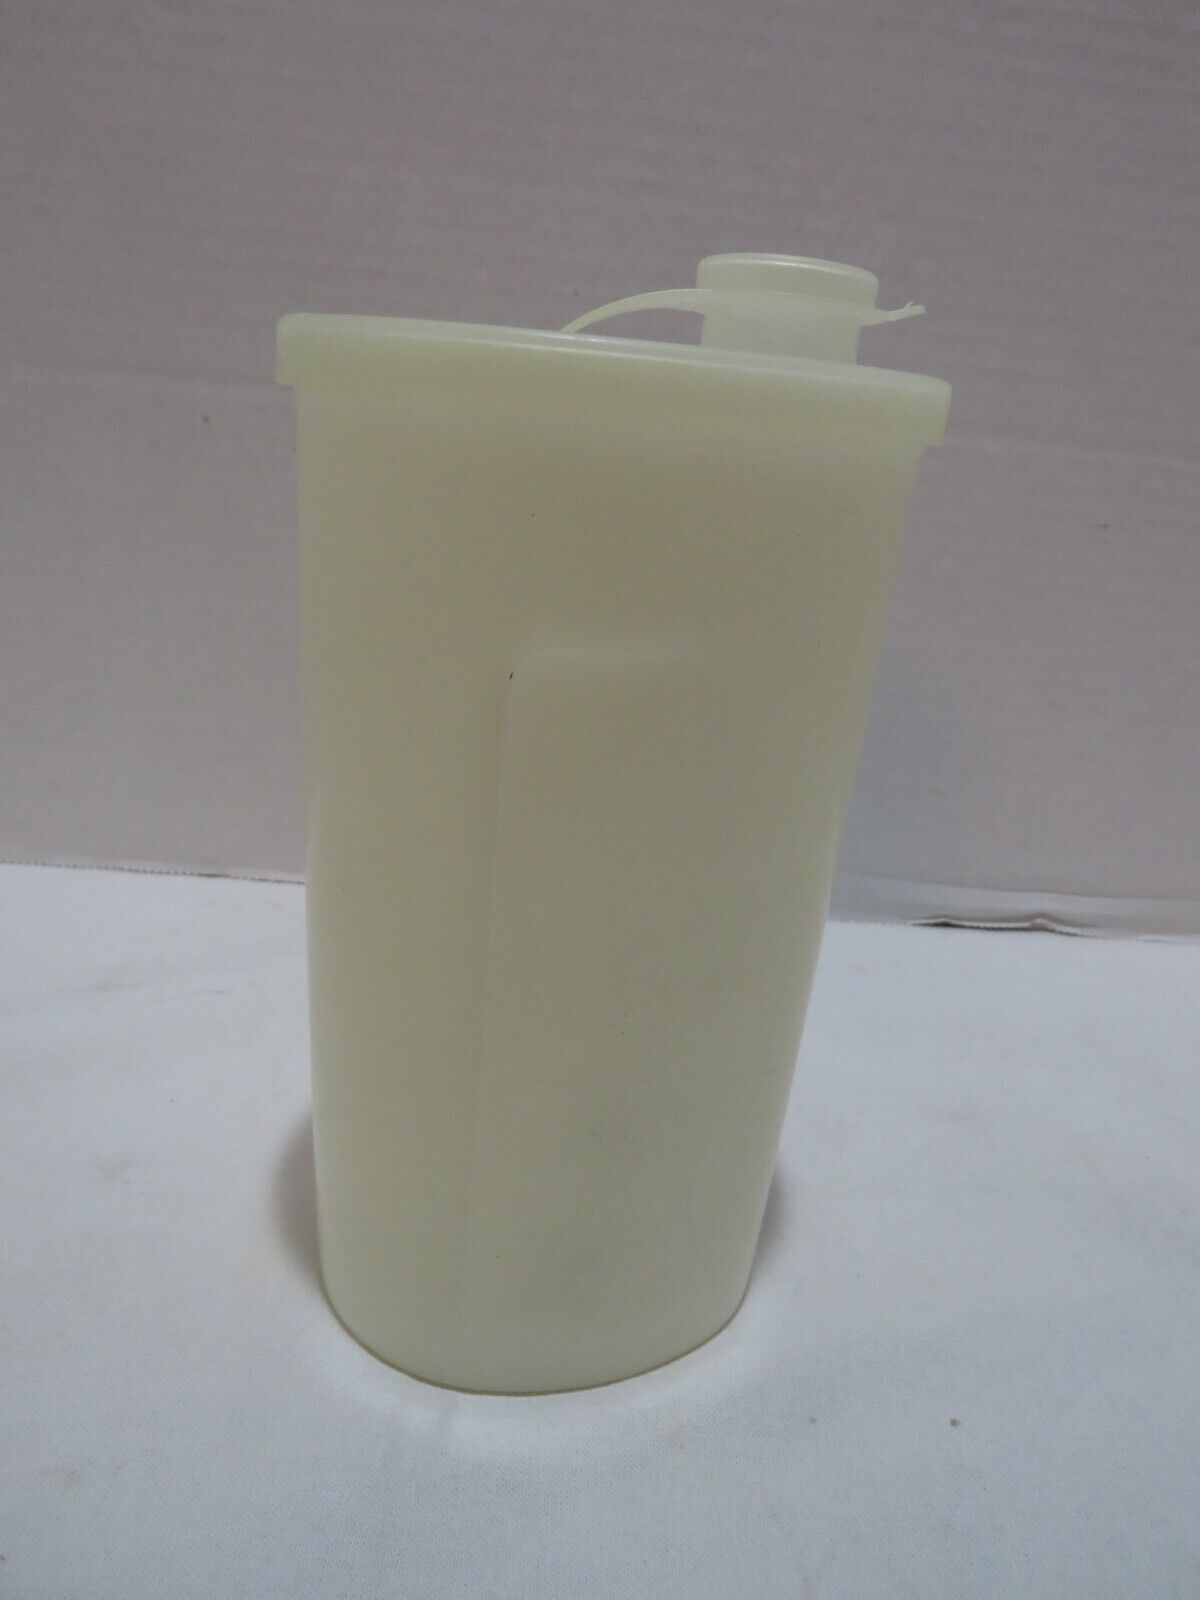 VTG TUPPERWARE SWEET SAVER SYRUP CONTAINER W/DRIPLESS SPOUT & CAP #640-4